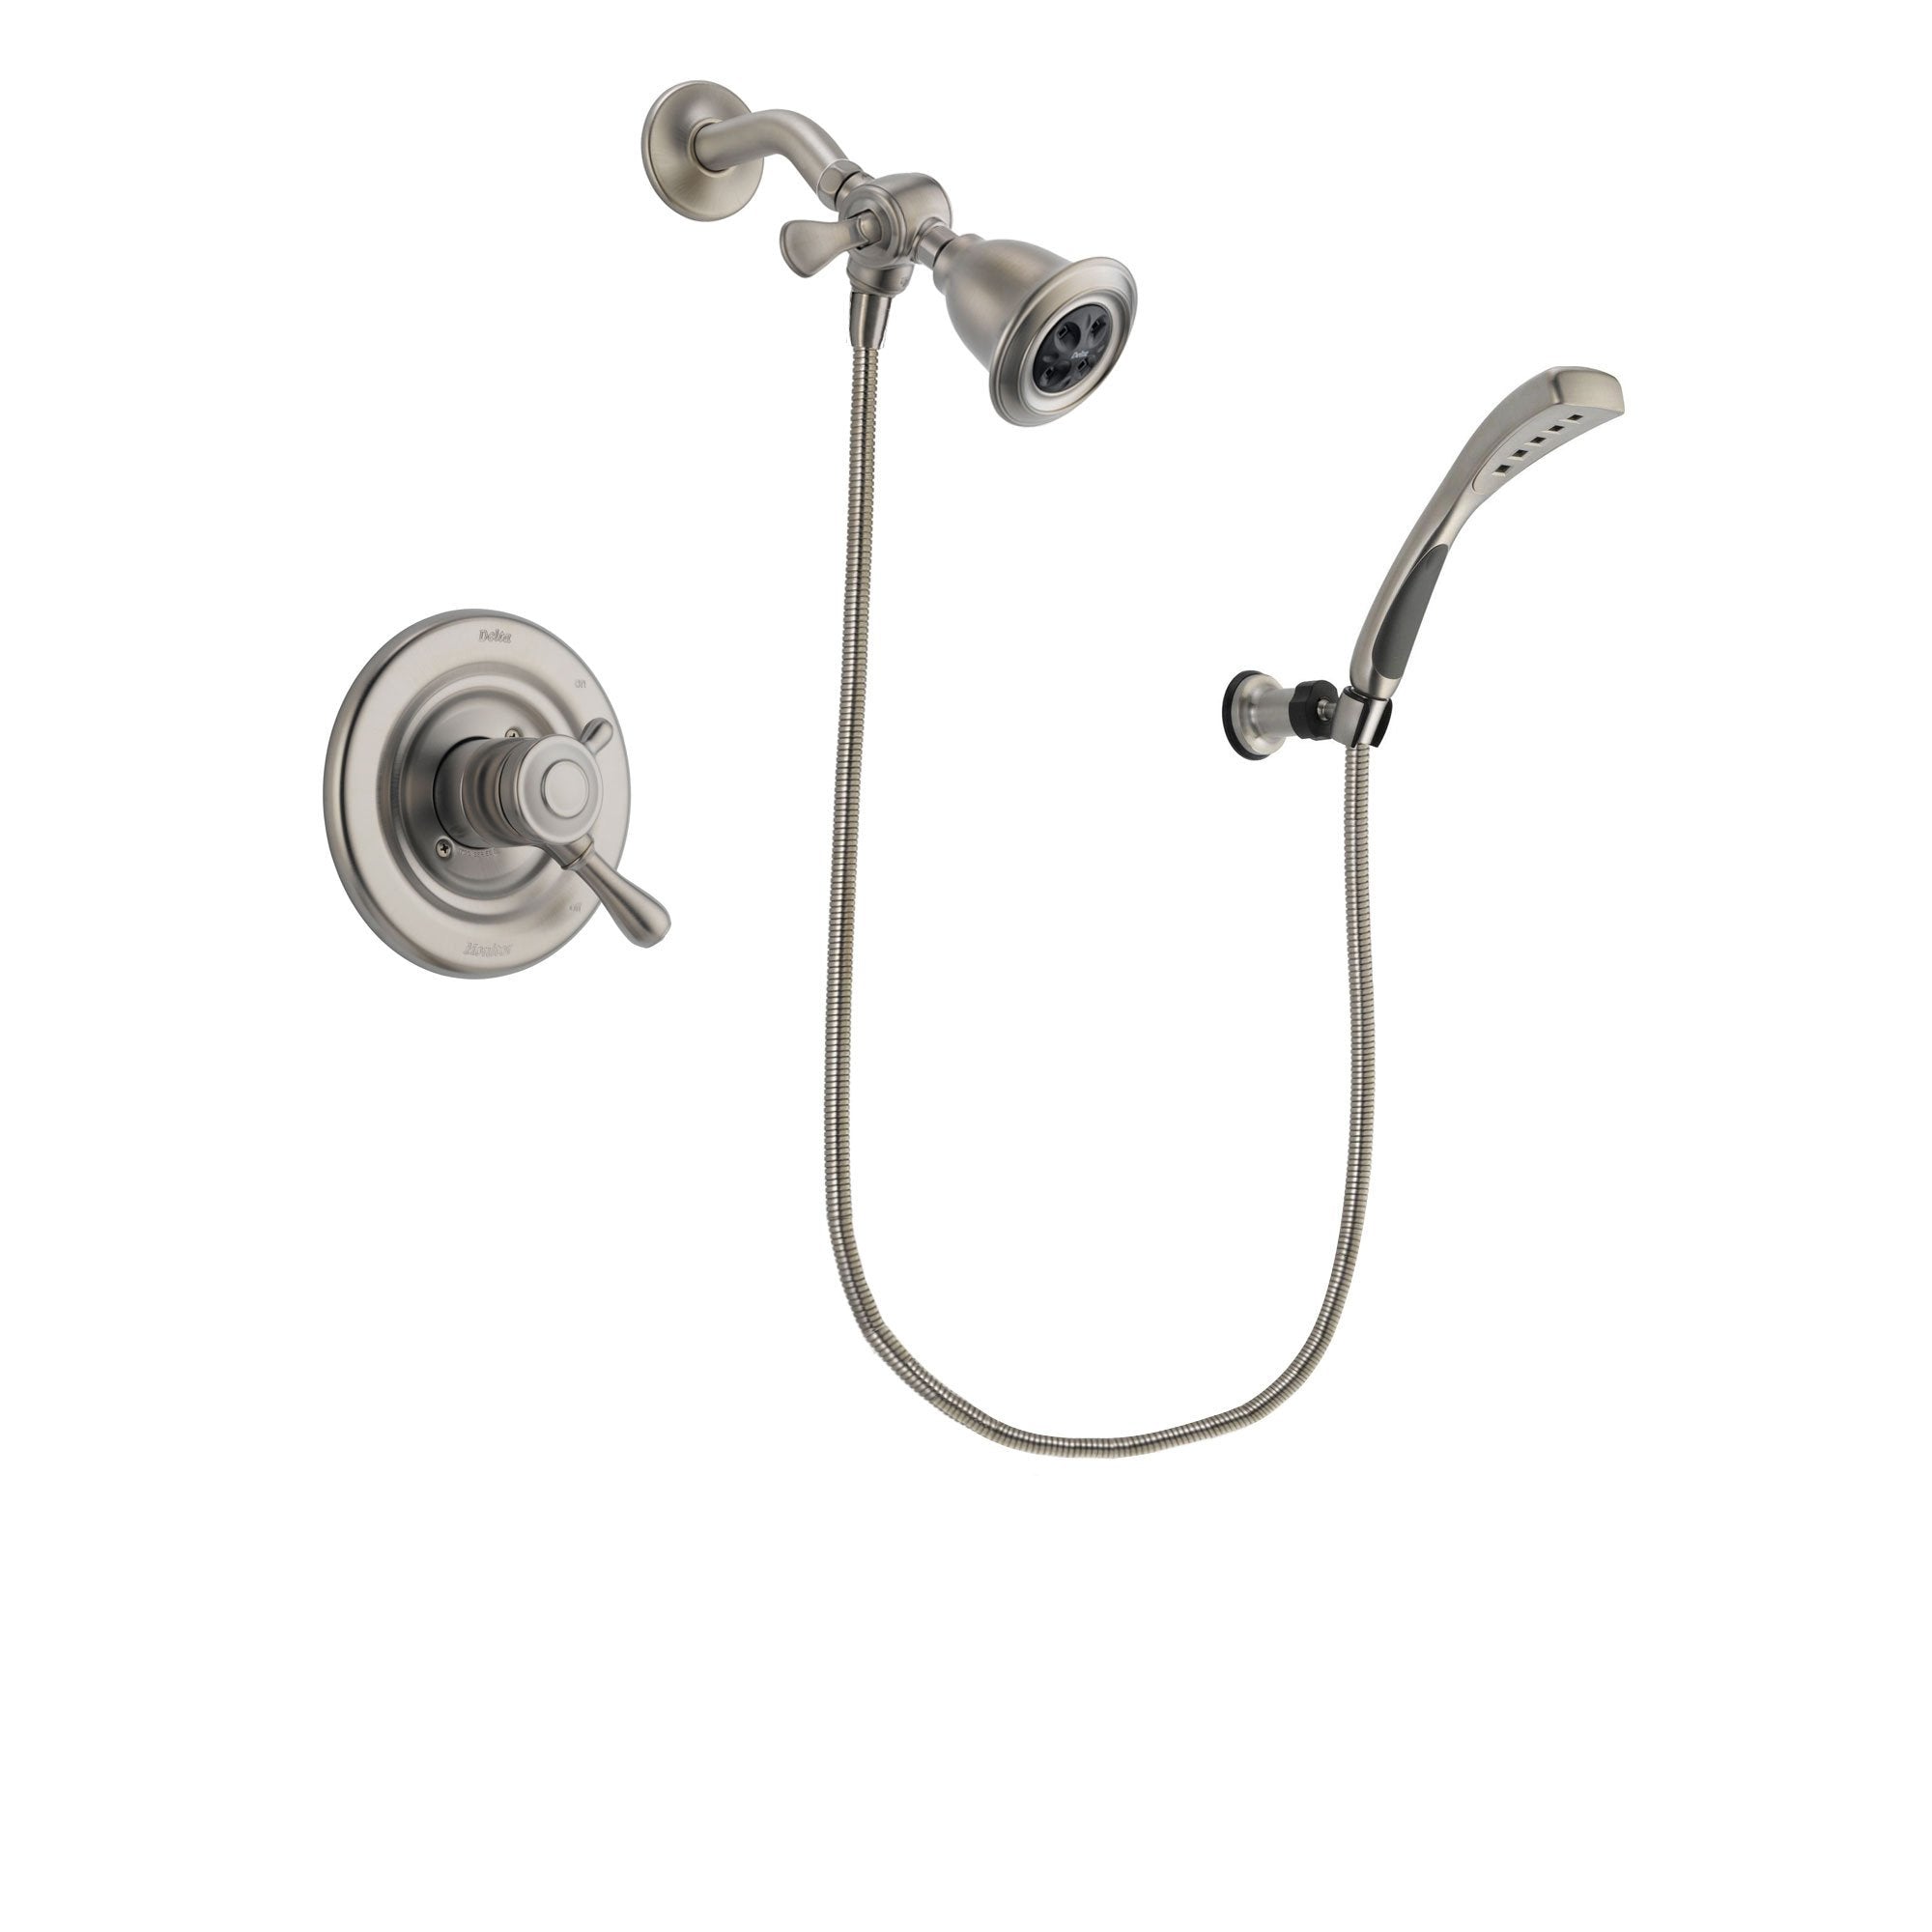 Delta Leland Stainless Steel Finish Dual Control Shower Faucet System Package with Water Efficient Showerhead and Wall Mounted Handshower Includes Rough-in Valve DSP1846V